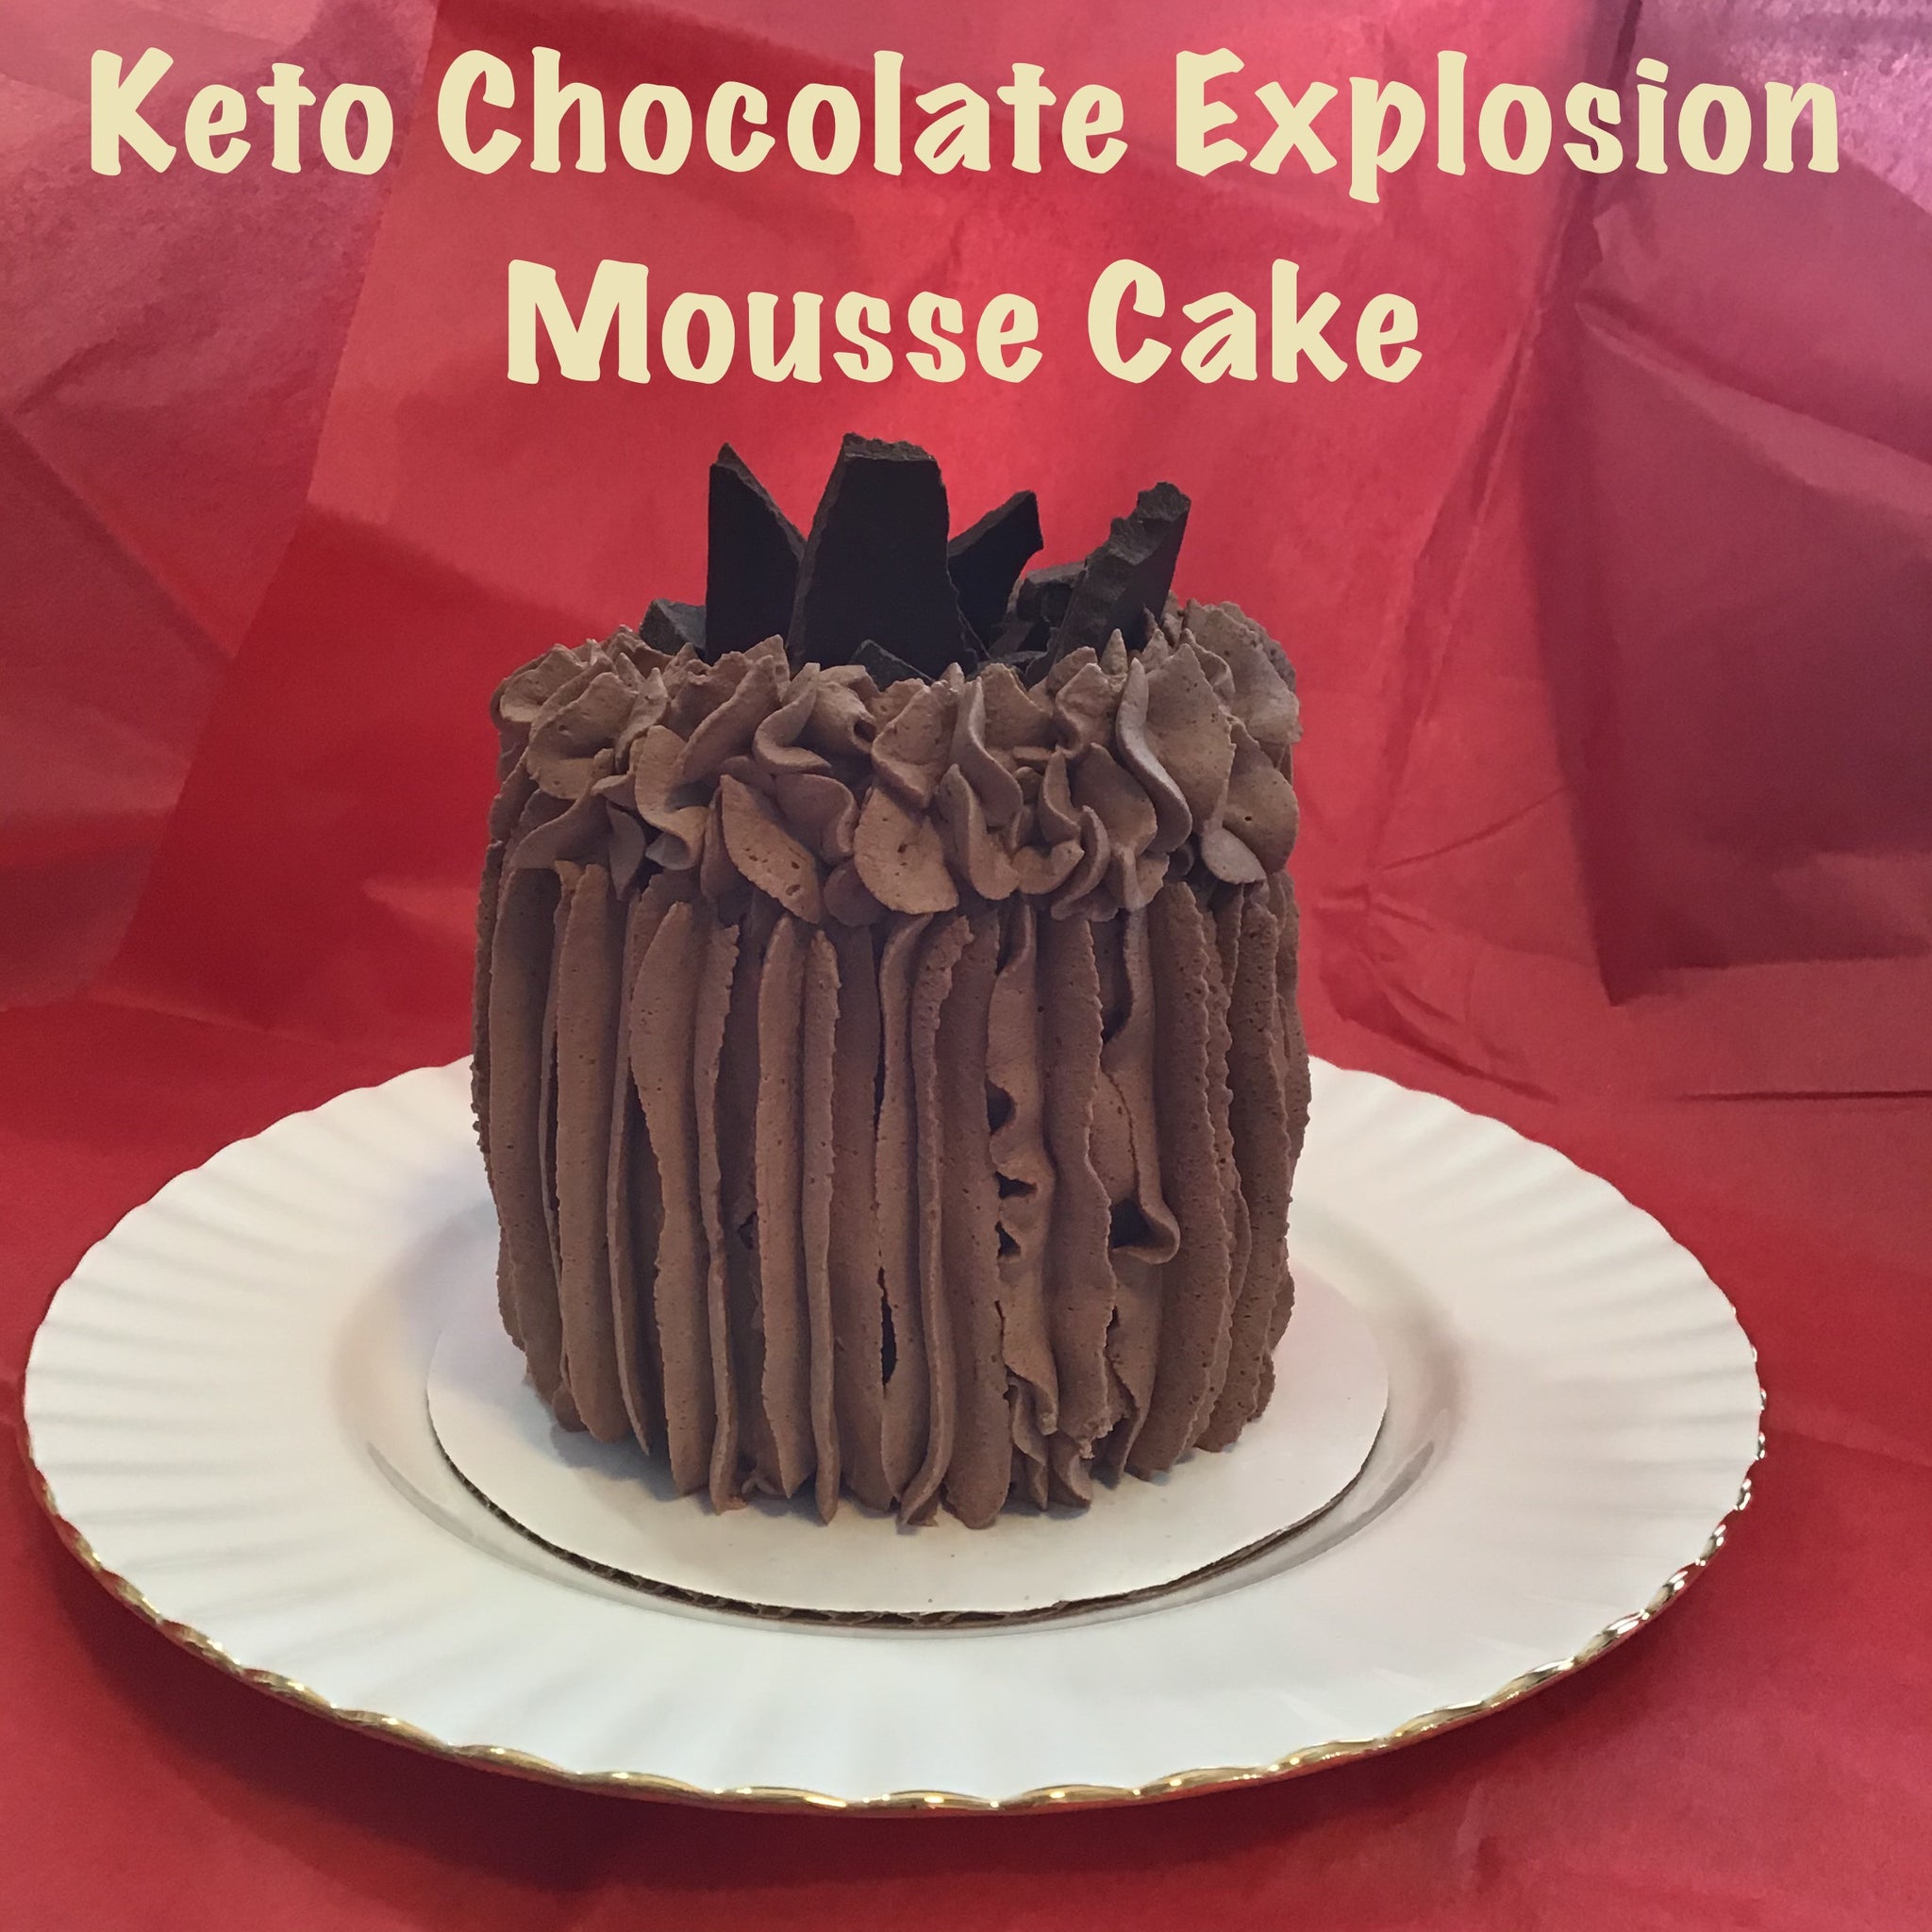 Chocolate Explosion Cake - Buy Online, Free UK Delivery — New Cakes